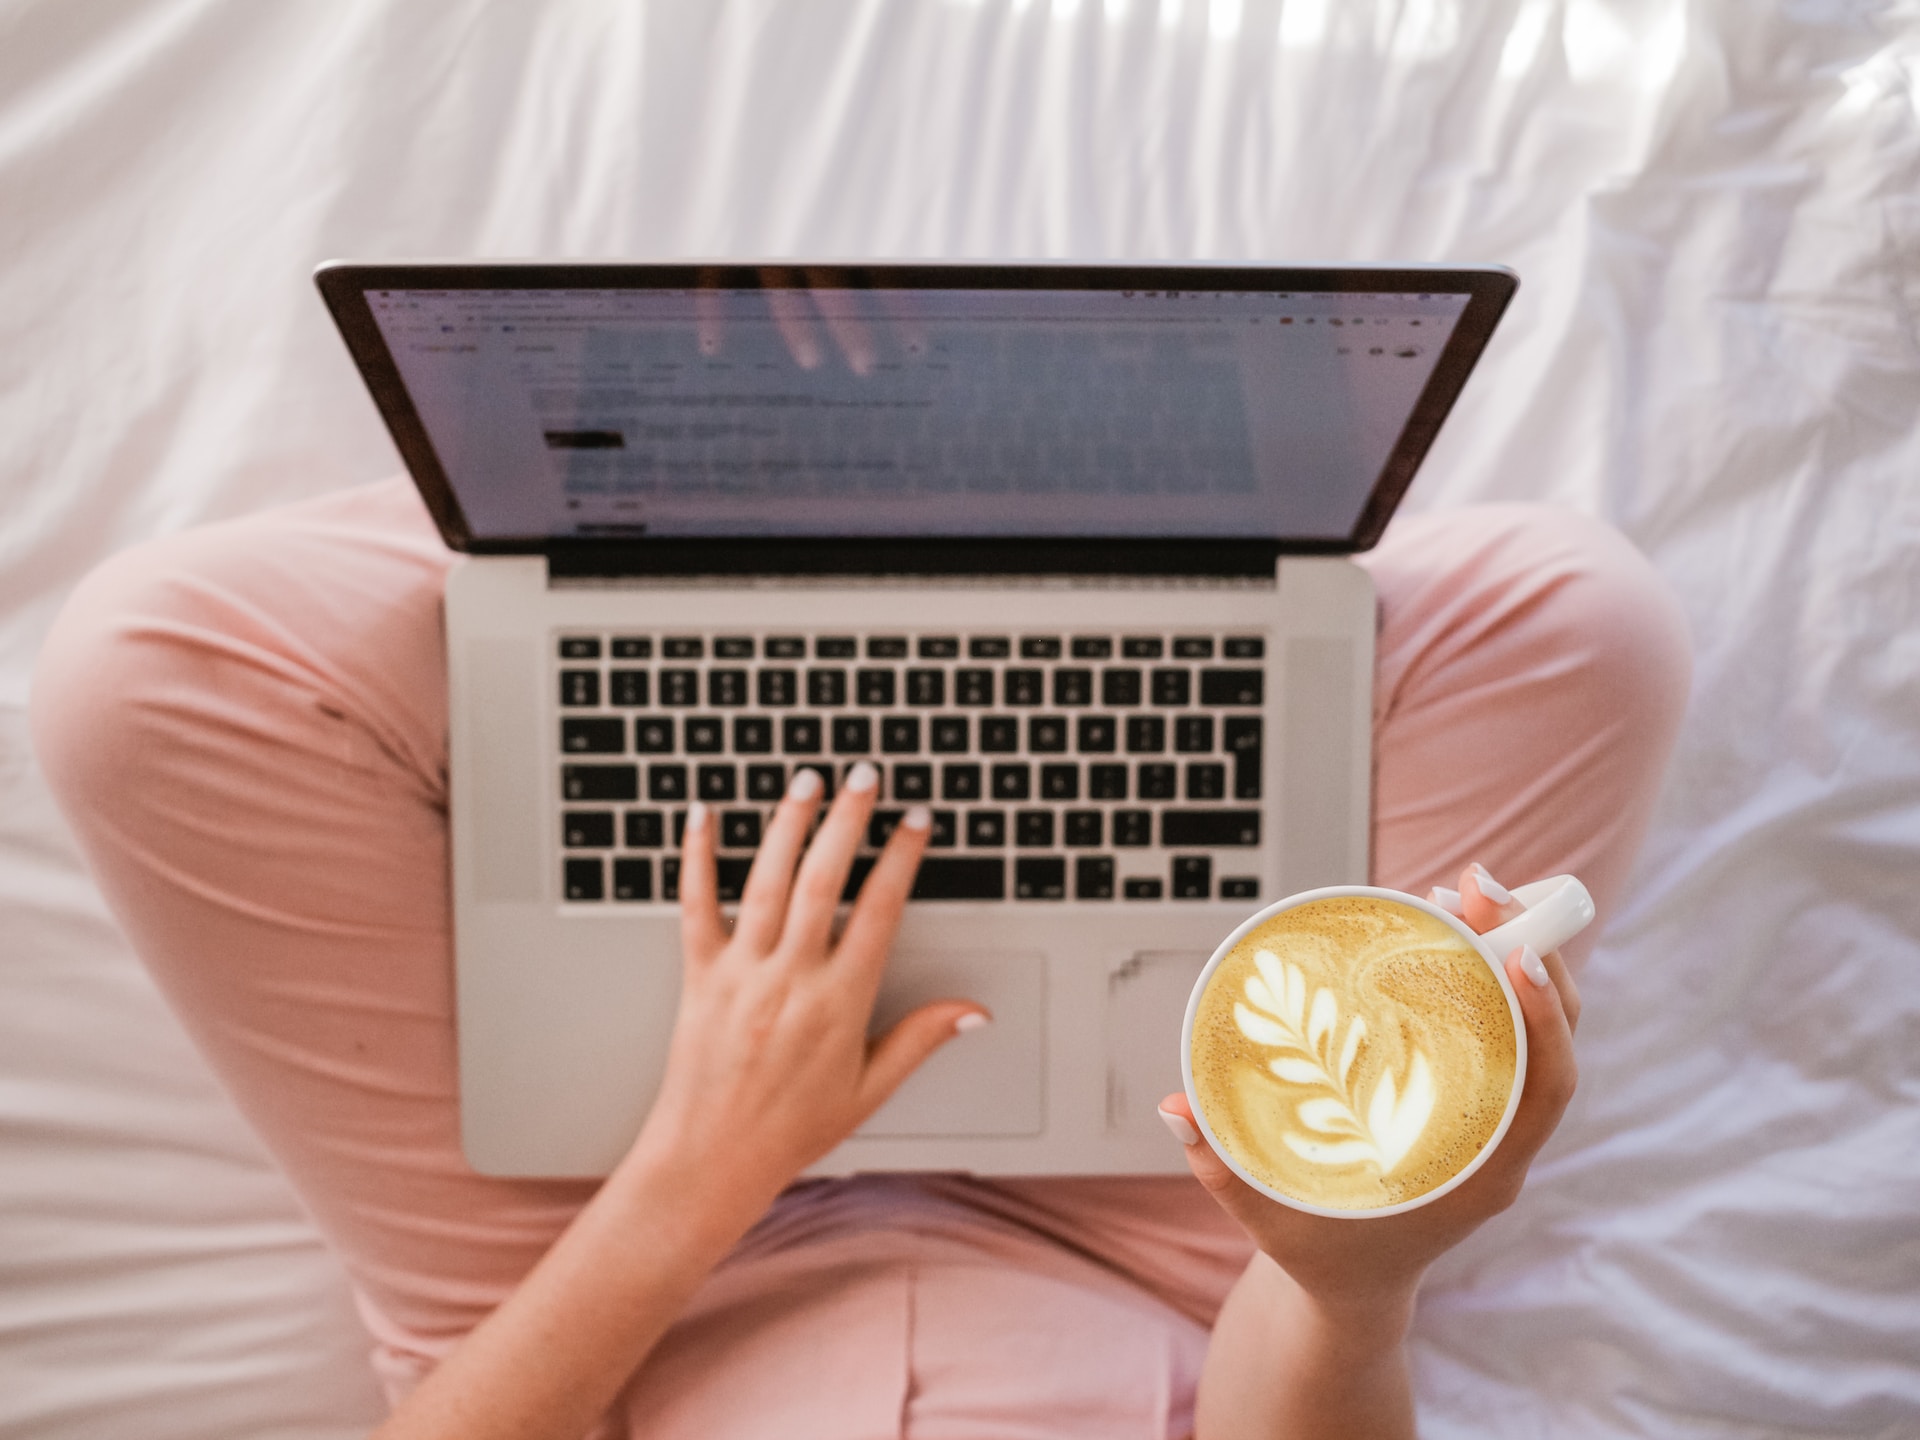 A shot from above of the lower half of a woman wearing pink pants siting on a white bed with a laptop open in her lap and a latte in a mug in her right hand